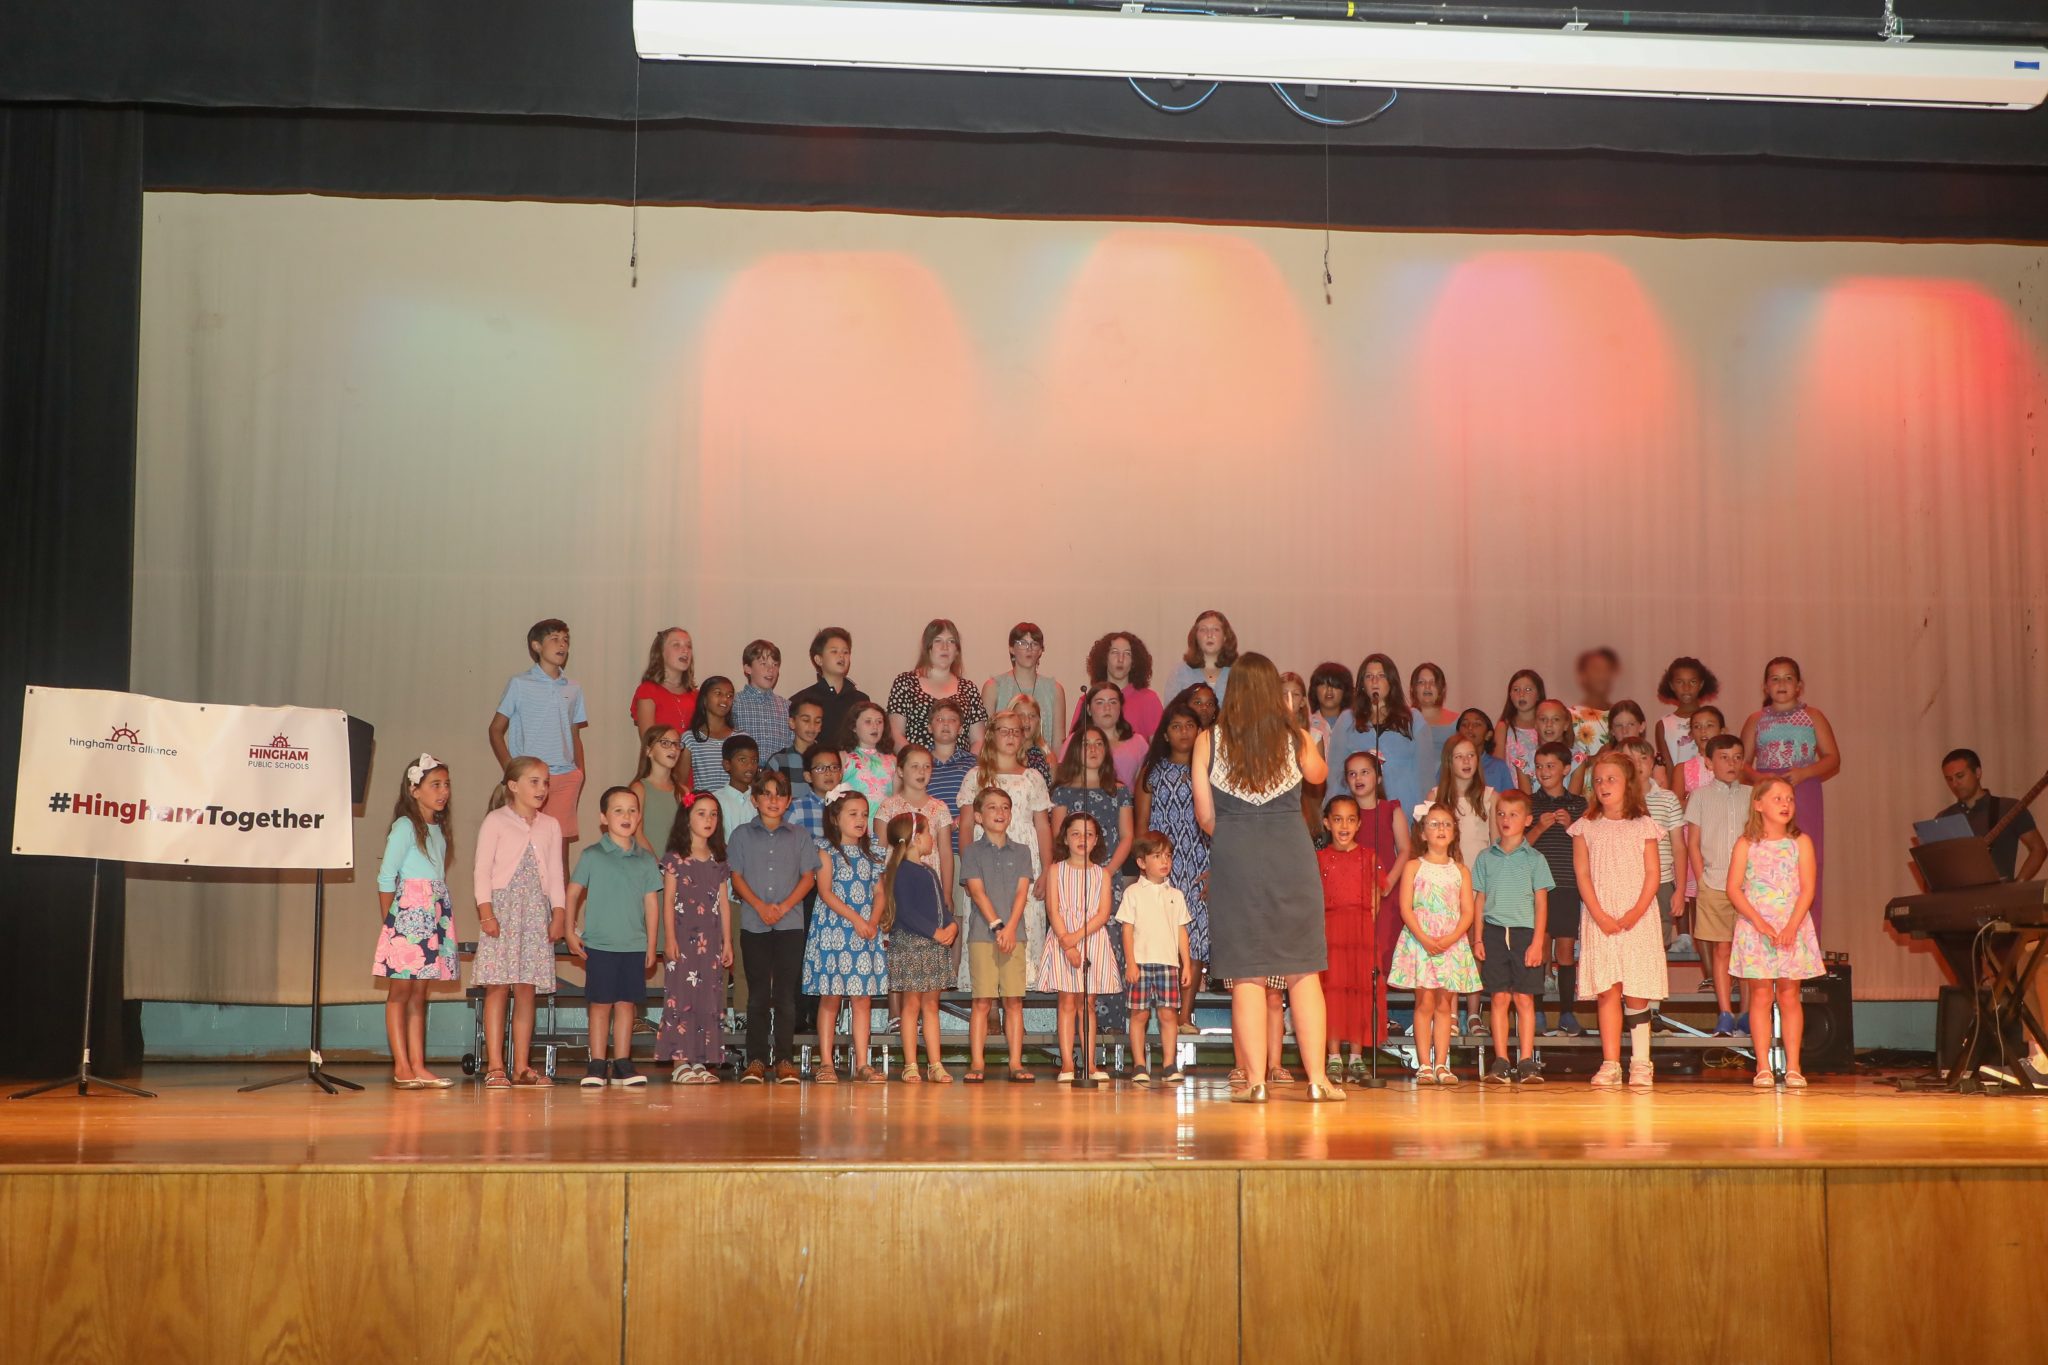 Under the direction of new Fine Arts Director Joann Bellis, 50 students gave a surprise performance to end the event. 